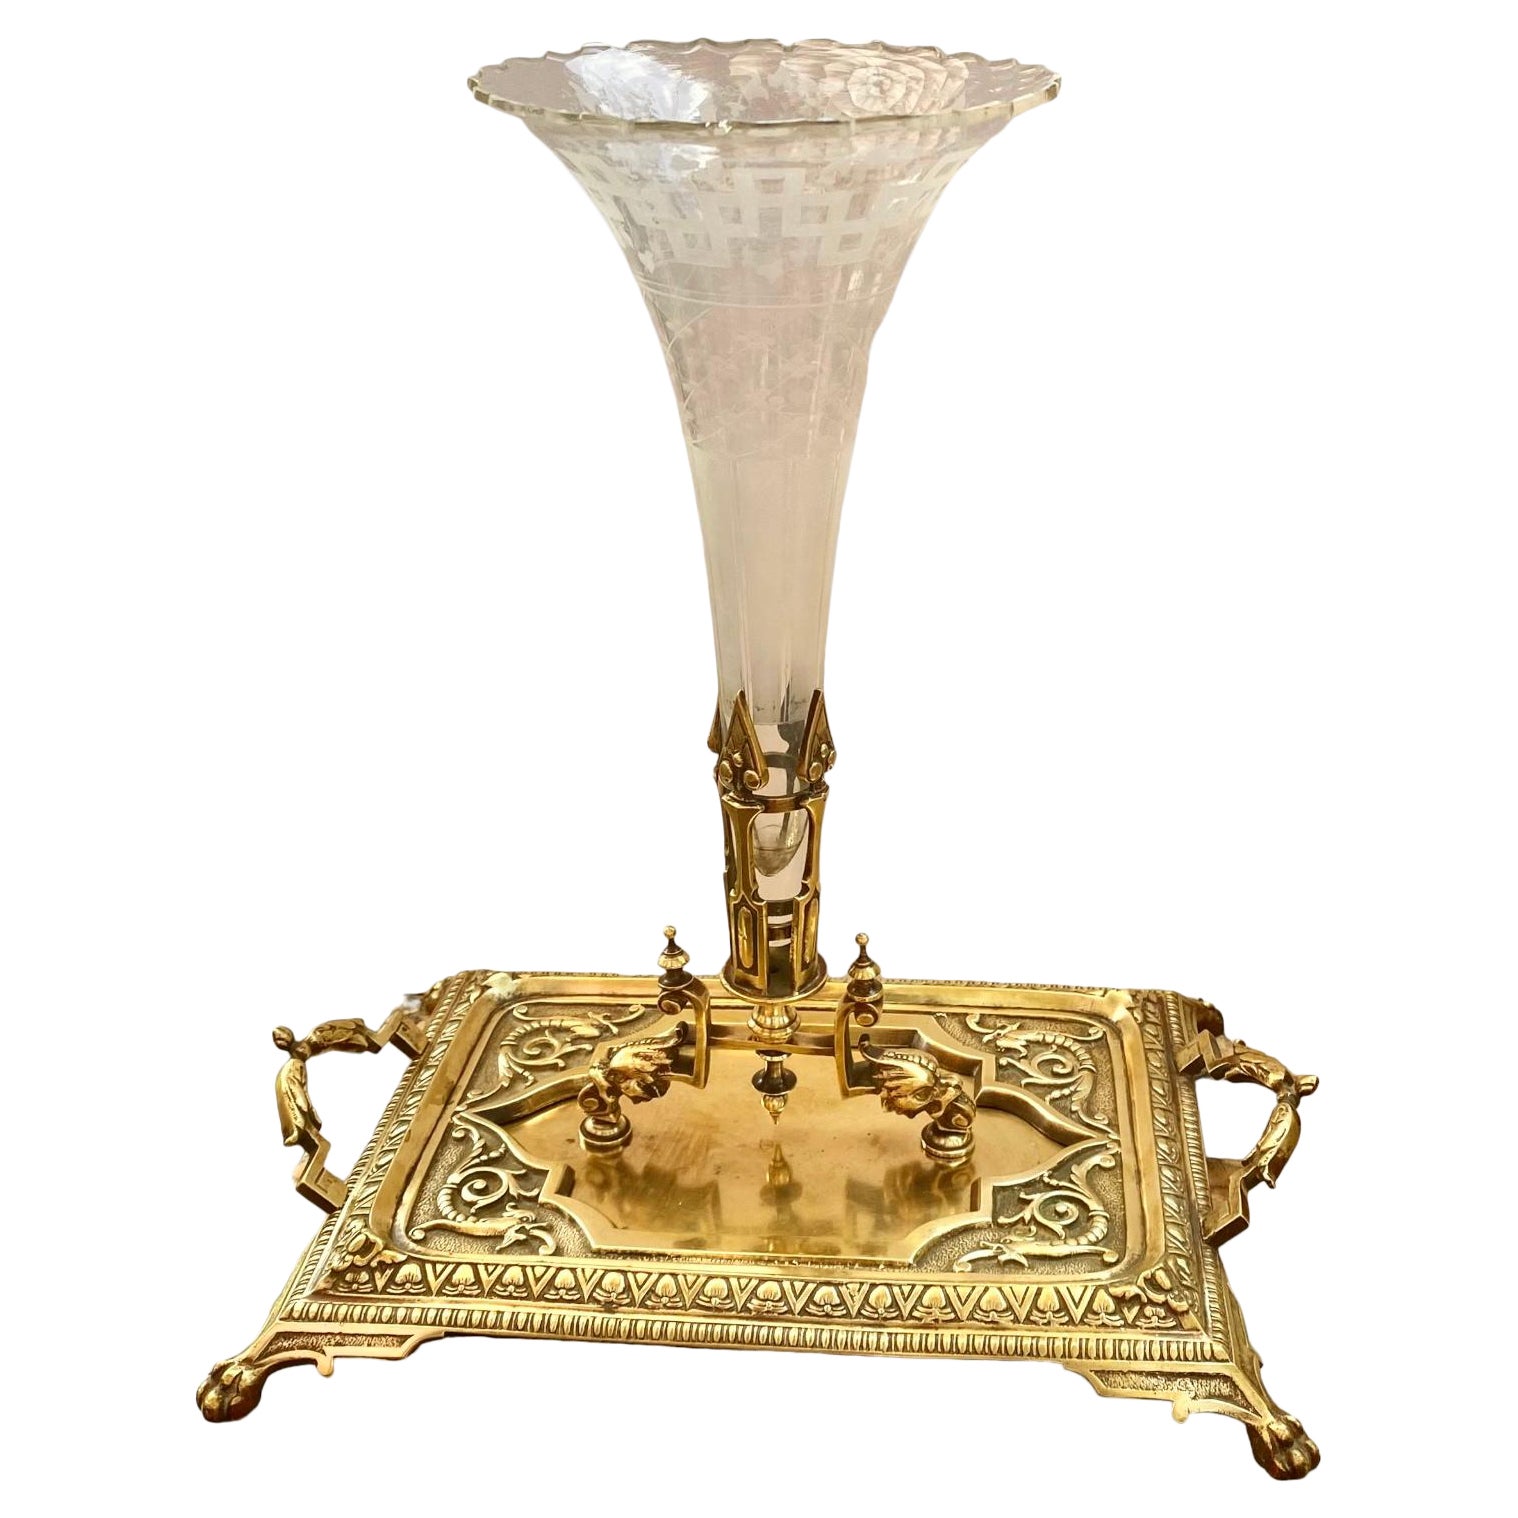  Late 19th Century Gilt Brass Card Tray  and Etched Crystal Centerpiece.     